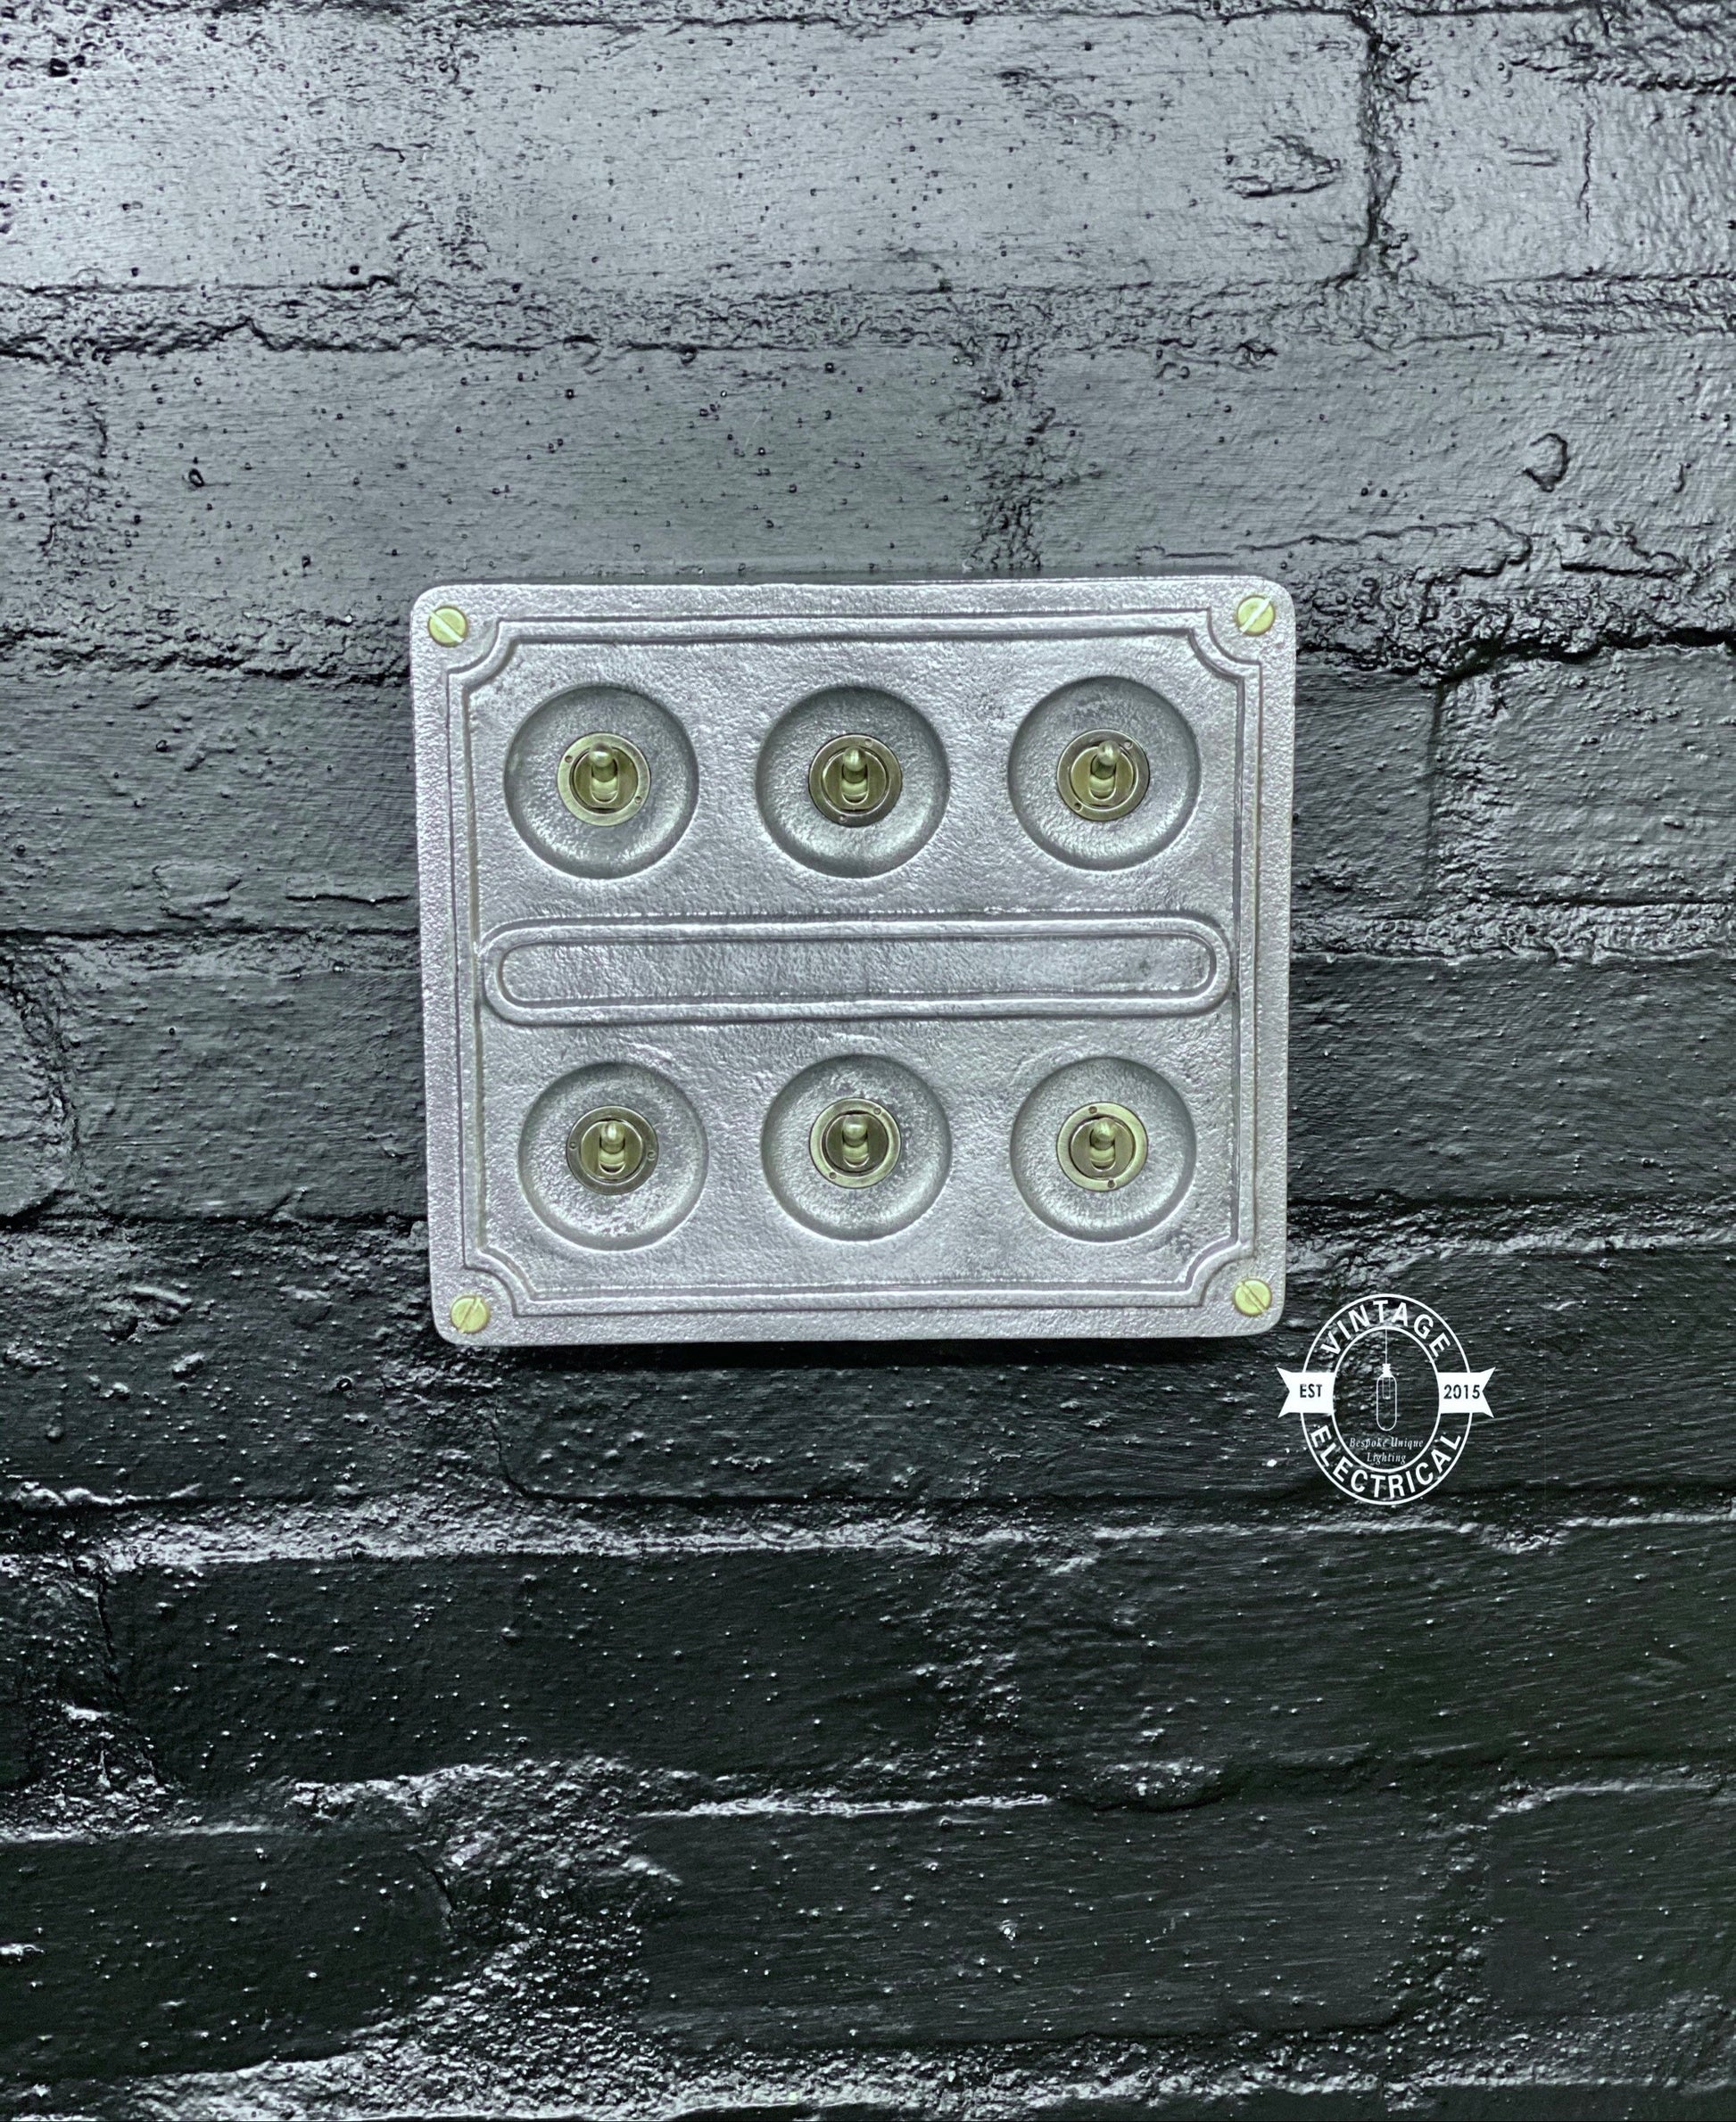 6 Gang 2 Way Solid Cast Metal Conduit Light Switch Industrial - BS EN Approved Vintage Crabtree 1950’s Style